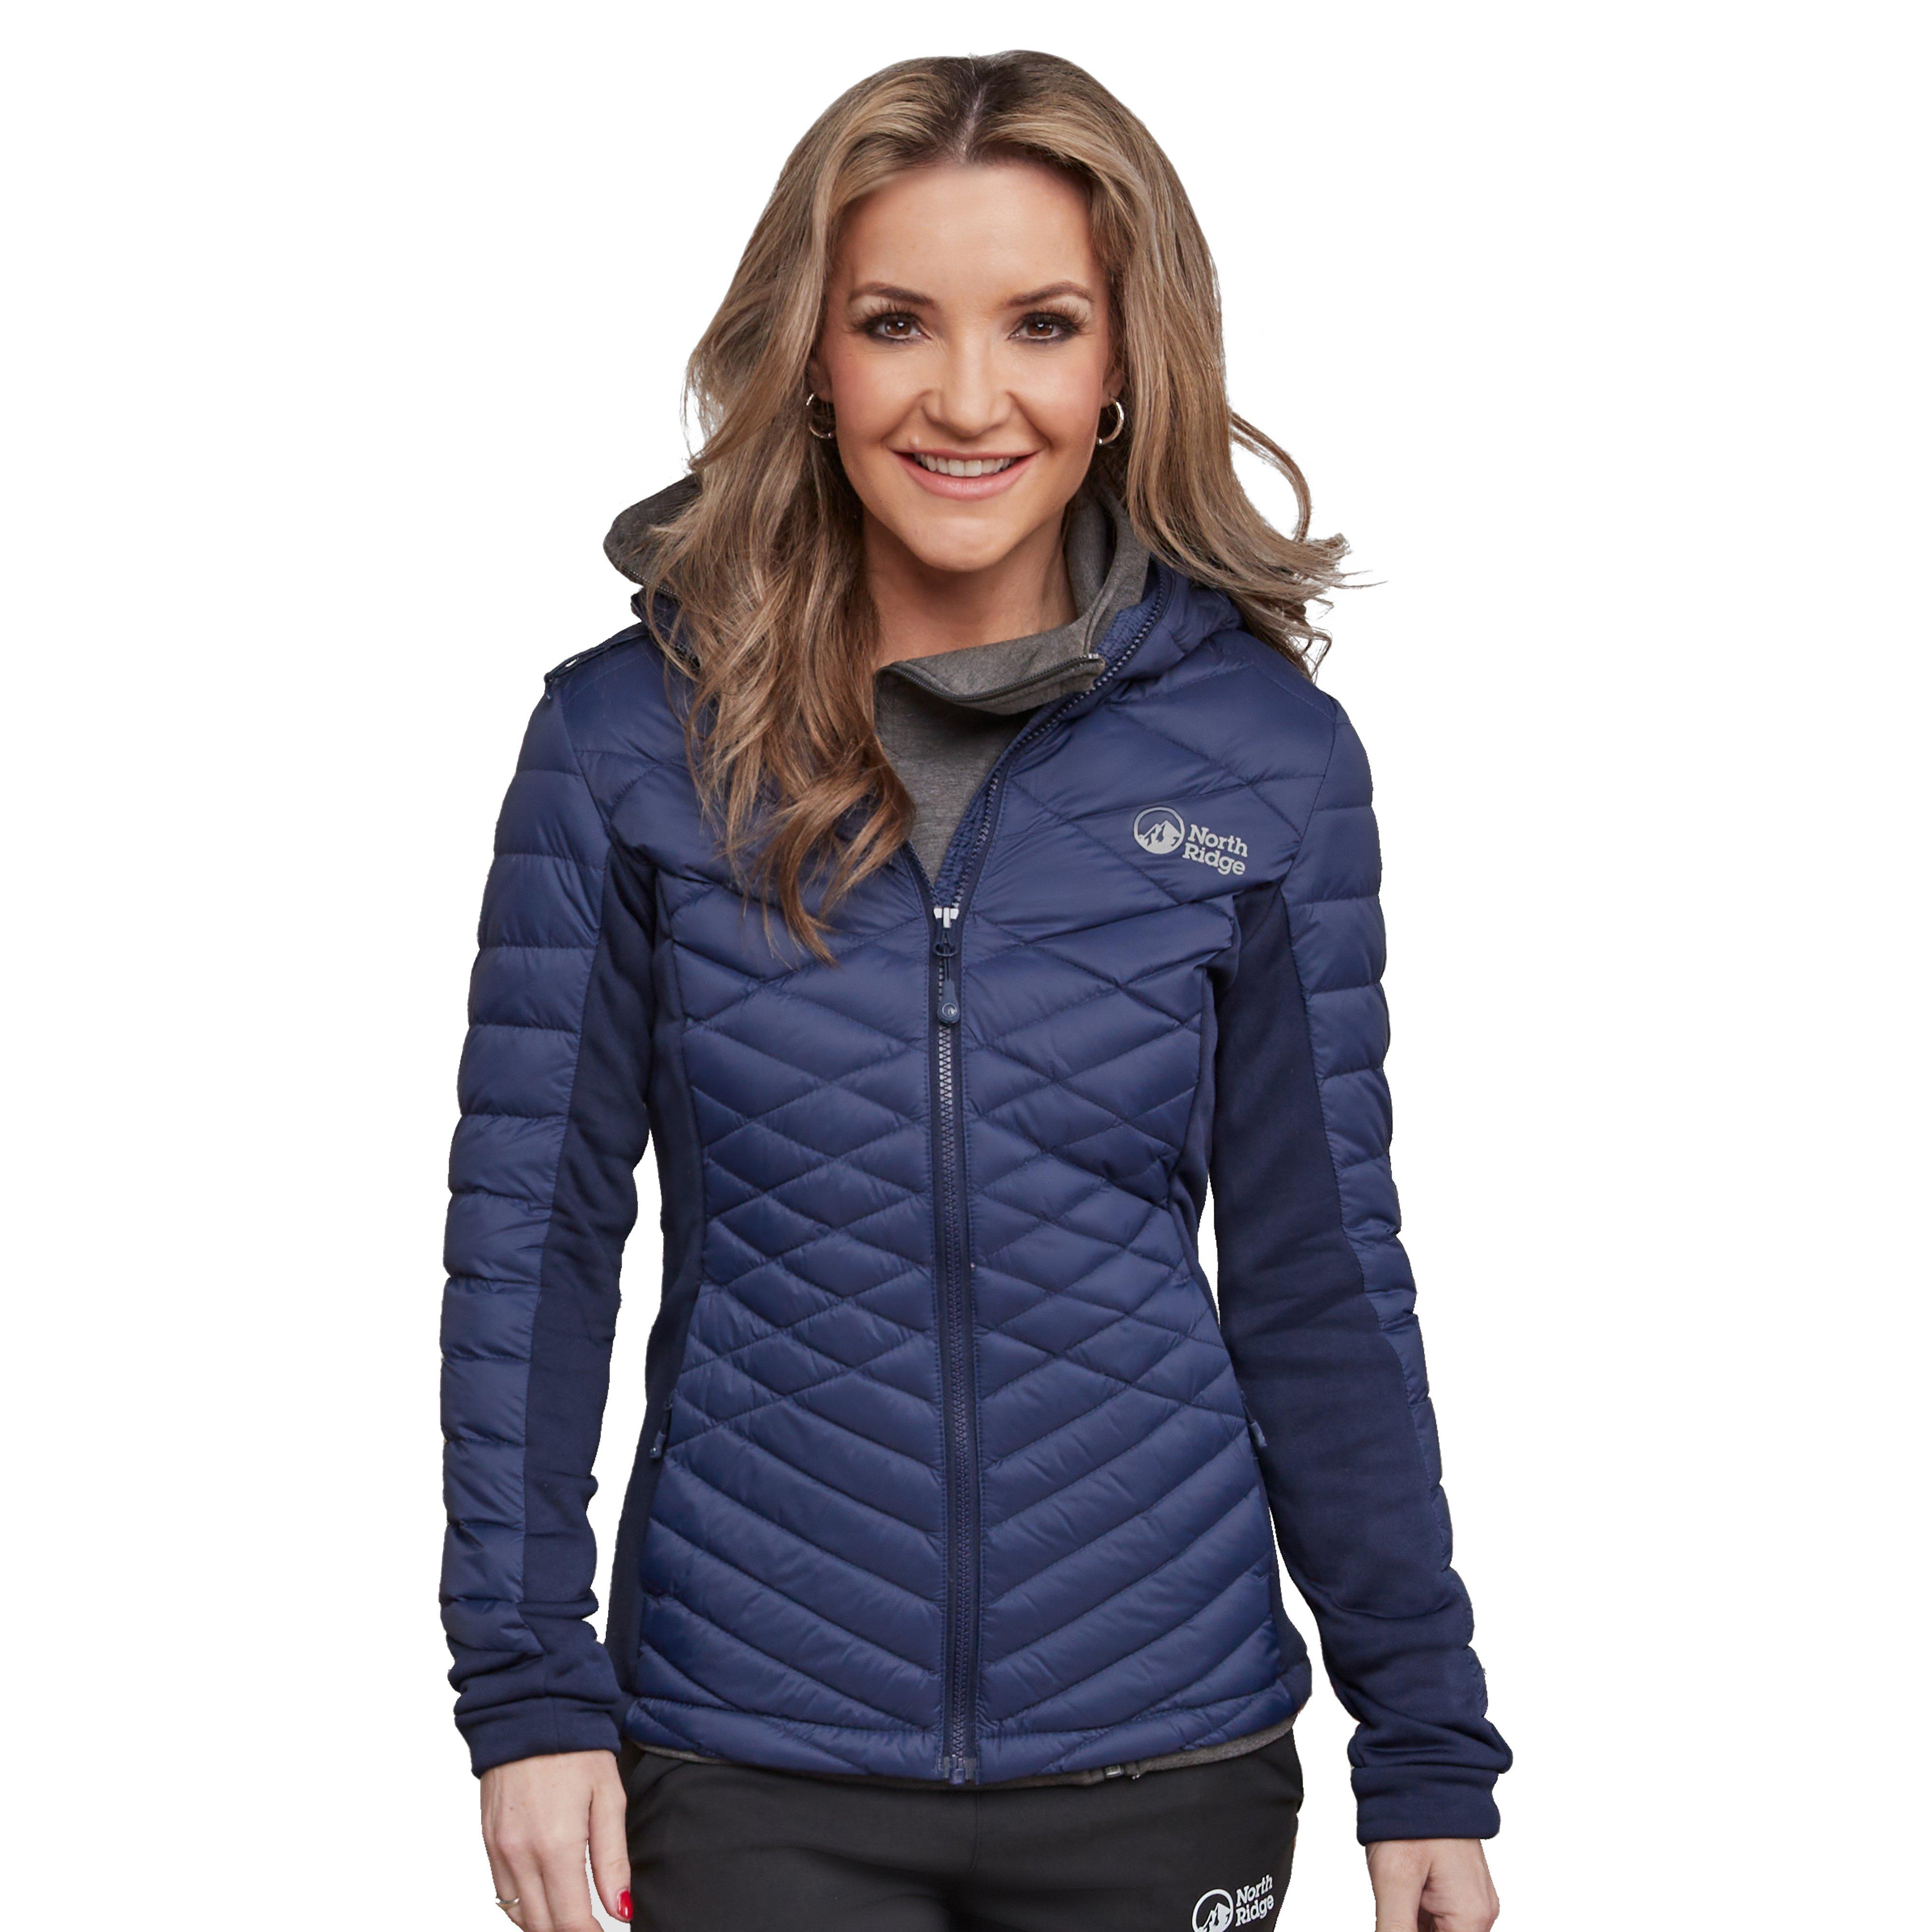 North Ridge Women’s Breeze Insulated Down Jacket with Stiffened Peaked Hood